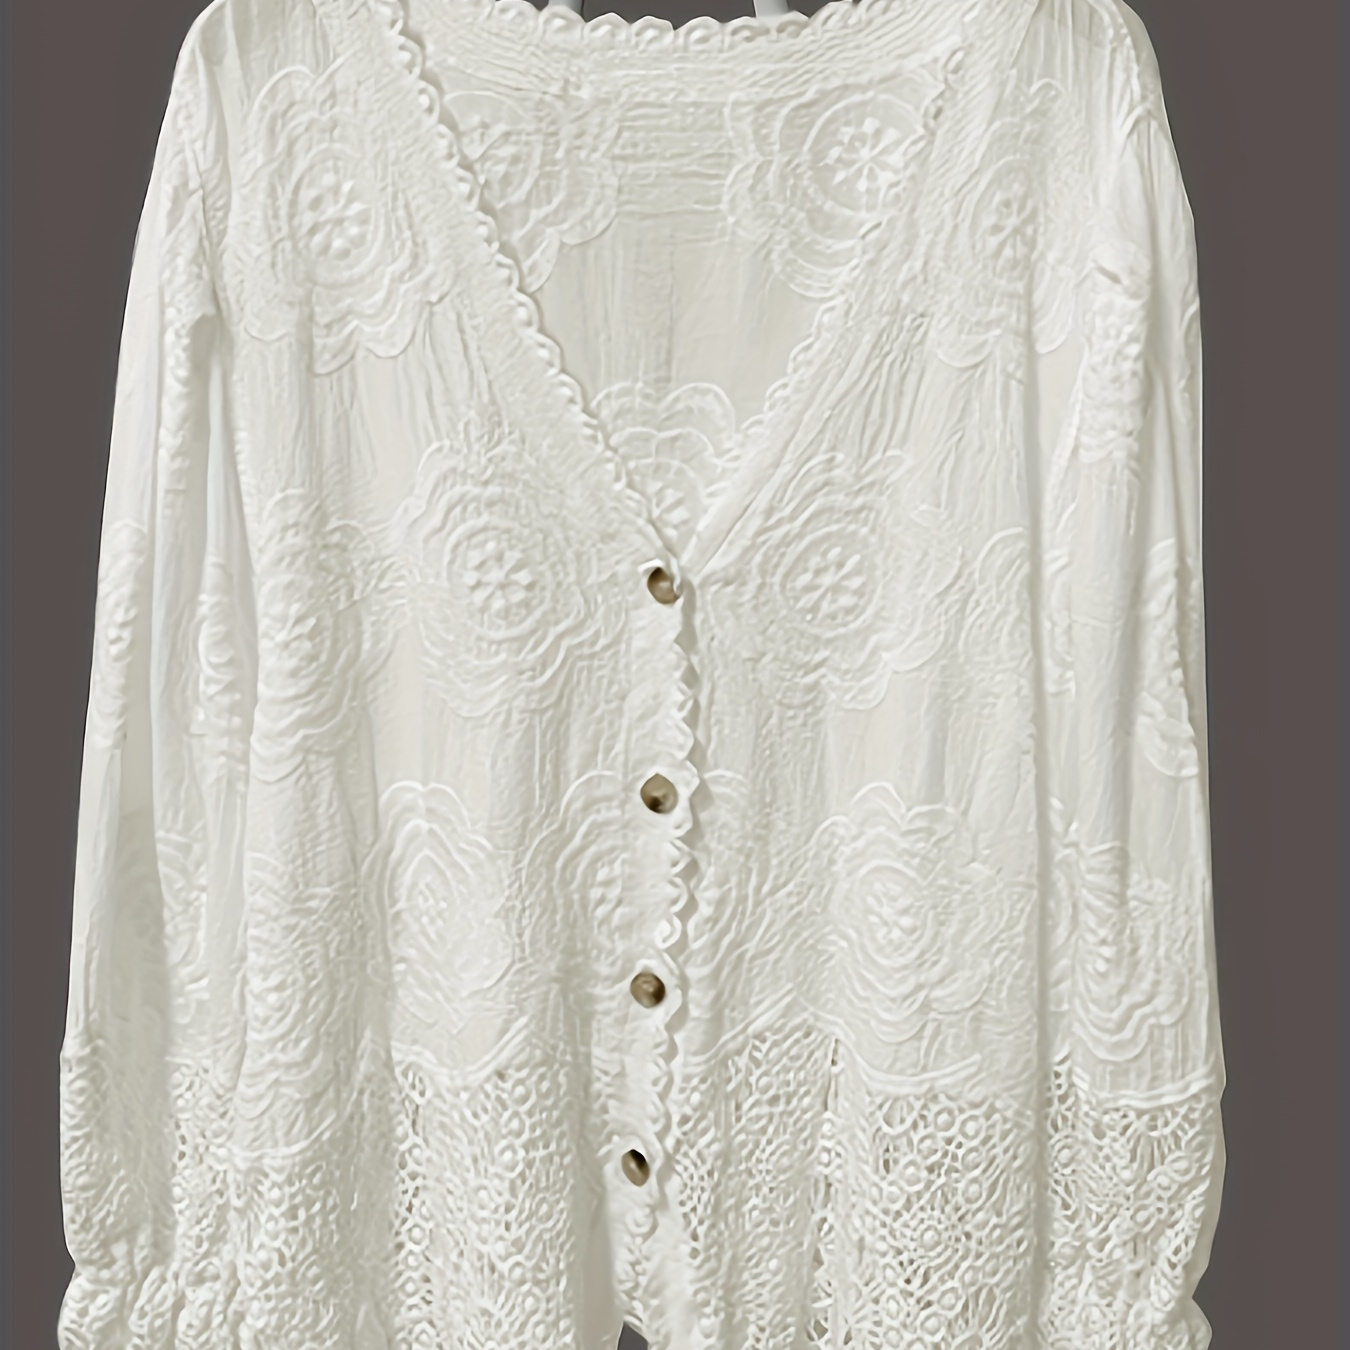 

Floral Pattern Contrast Lace Cardigan, Elegant Button Front V Neck Top For Spring & Fall, Women's Clothing